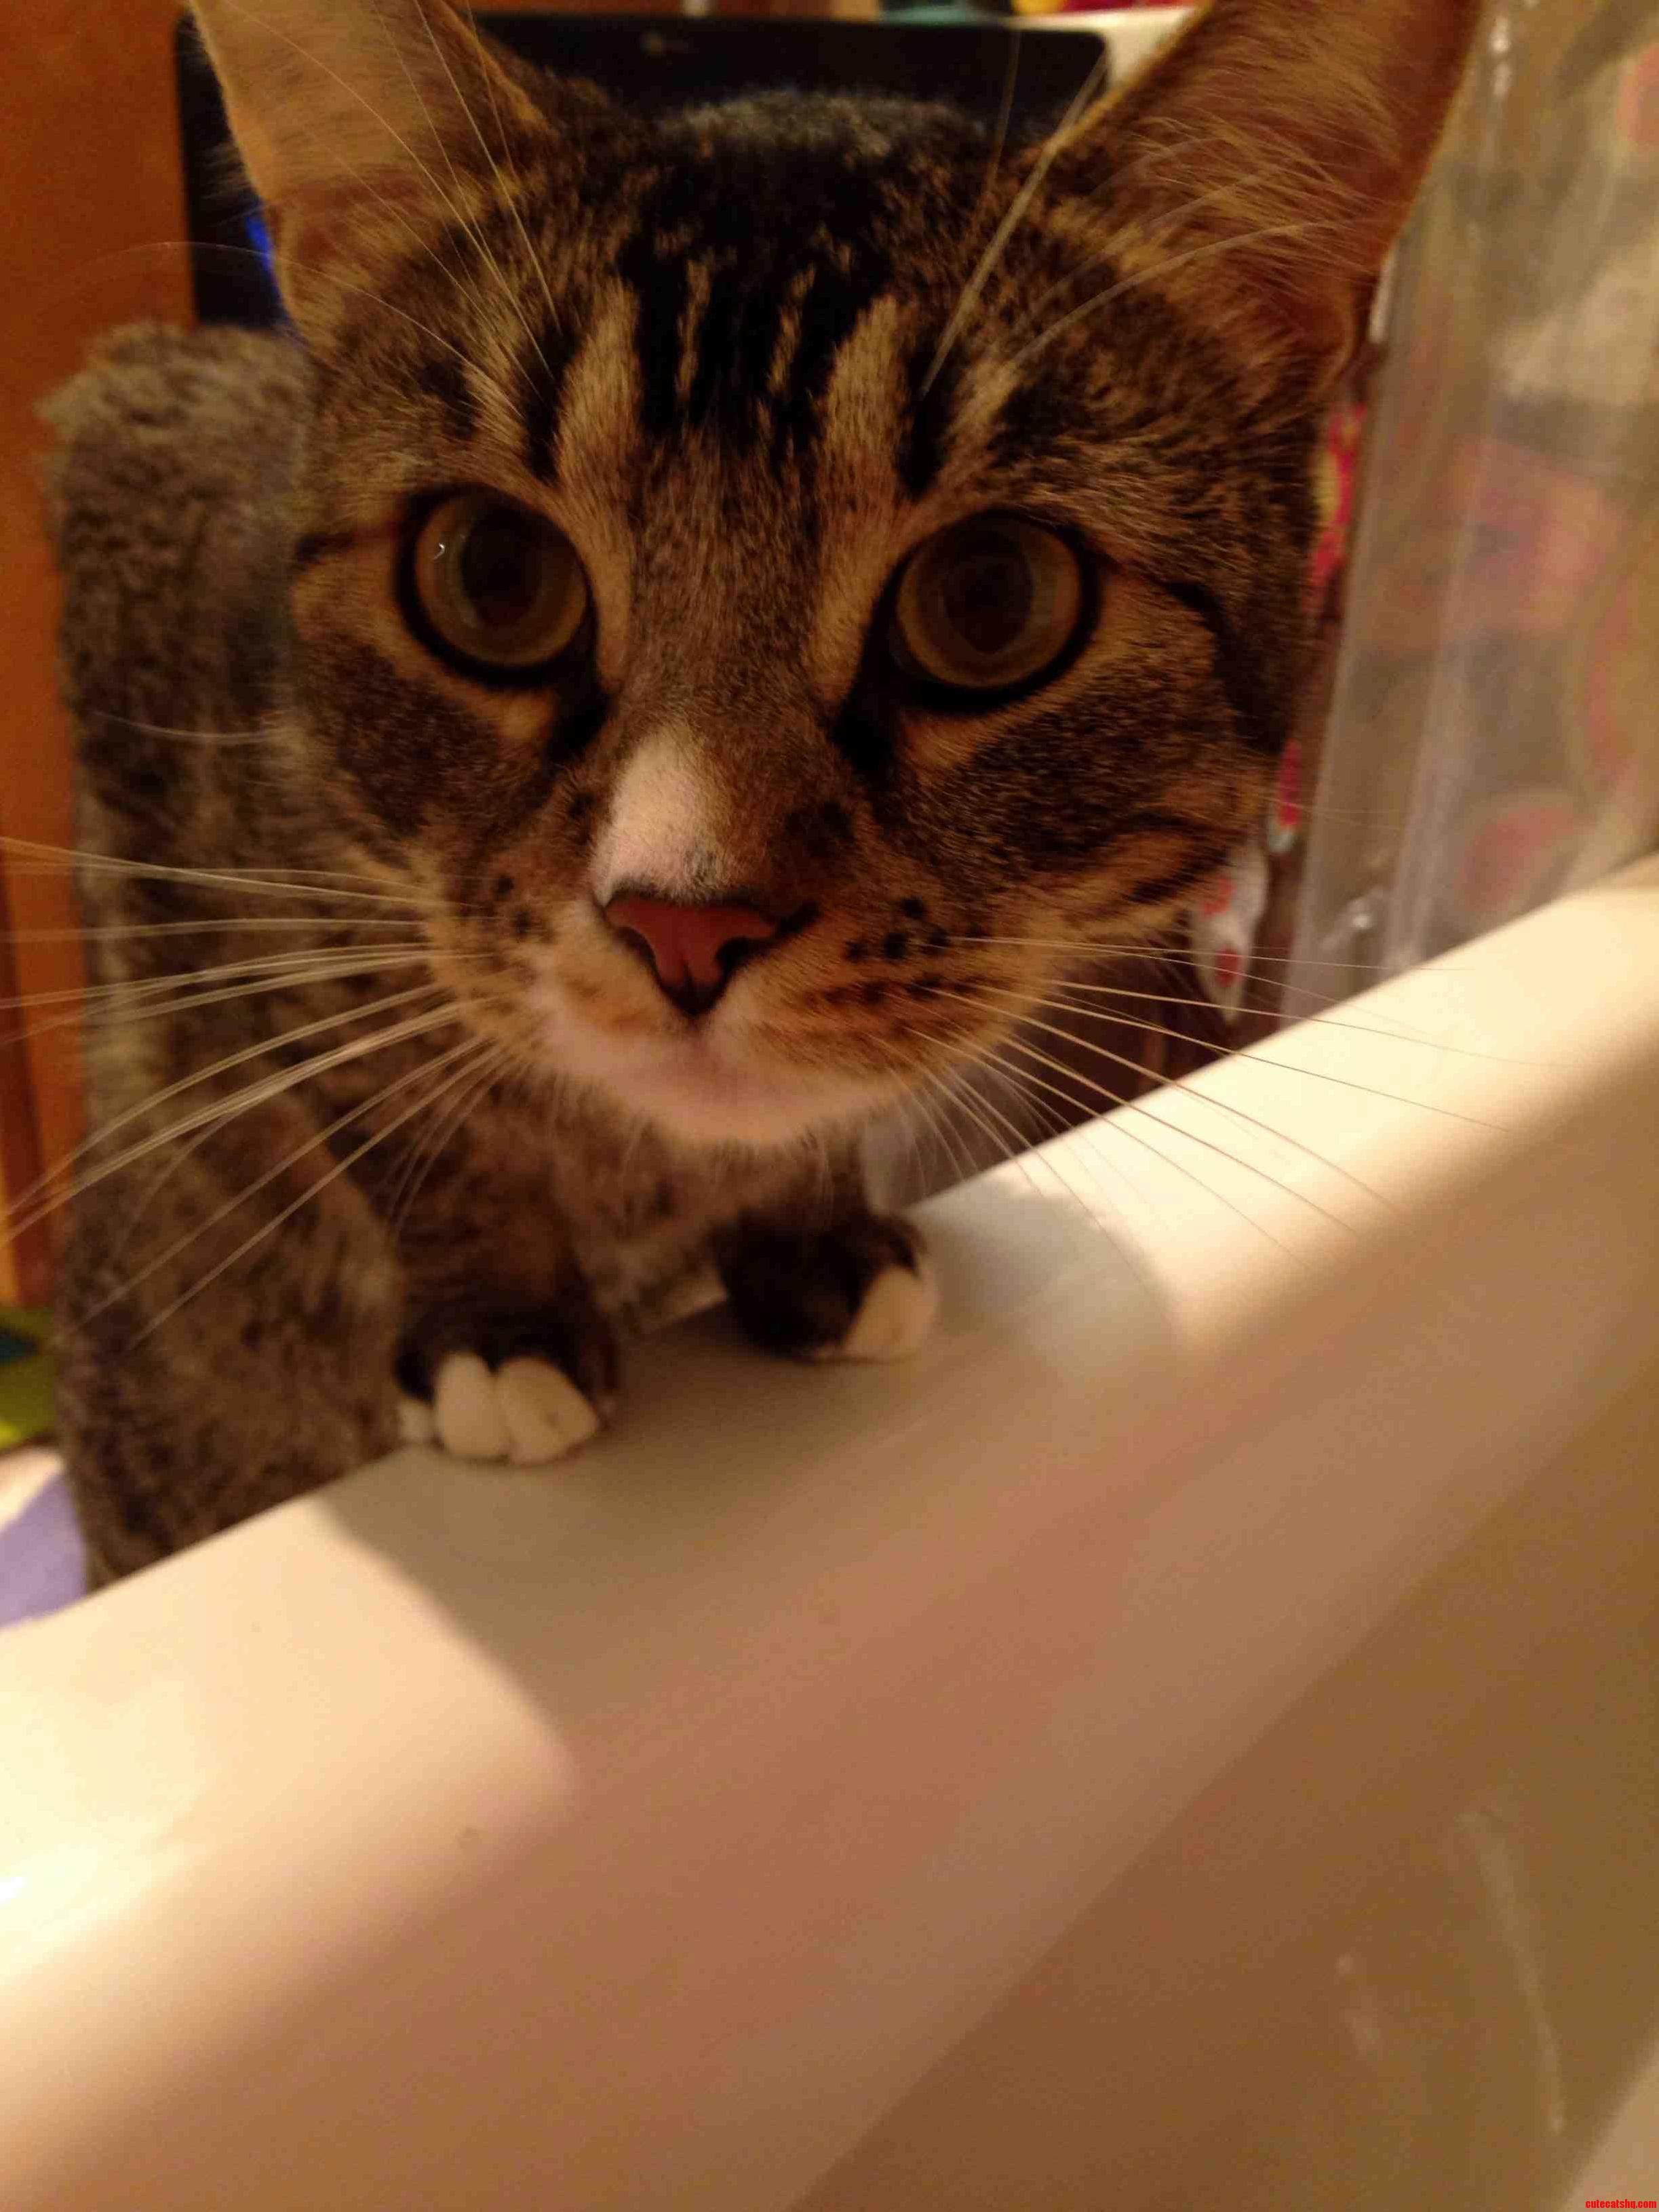 Banjo Is Very Concerned About Mommy In The Bathtub.